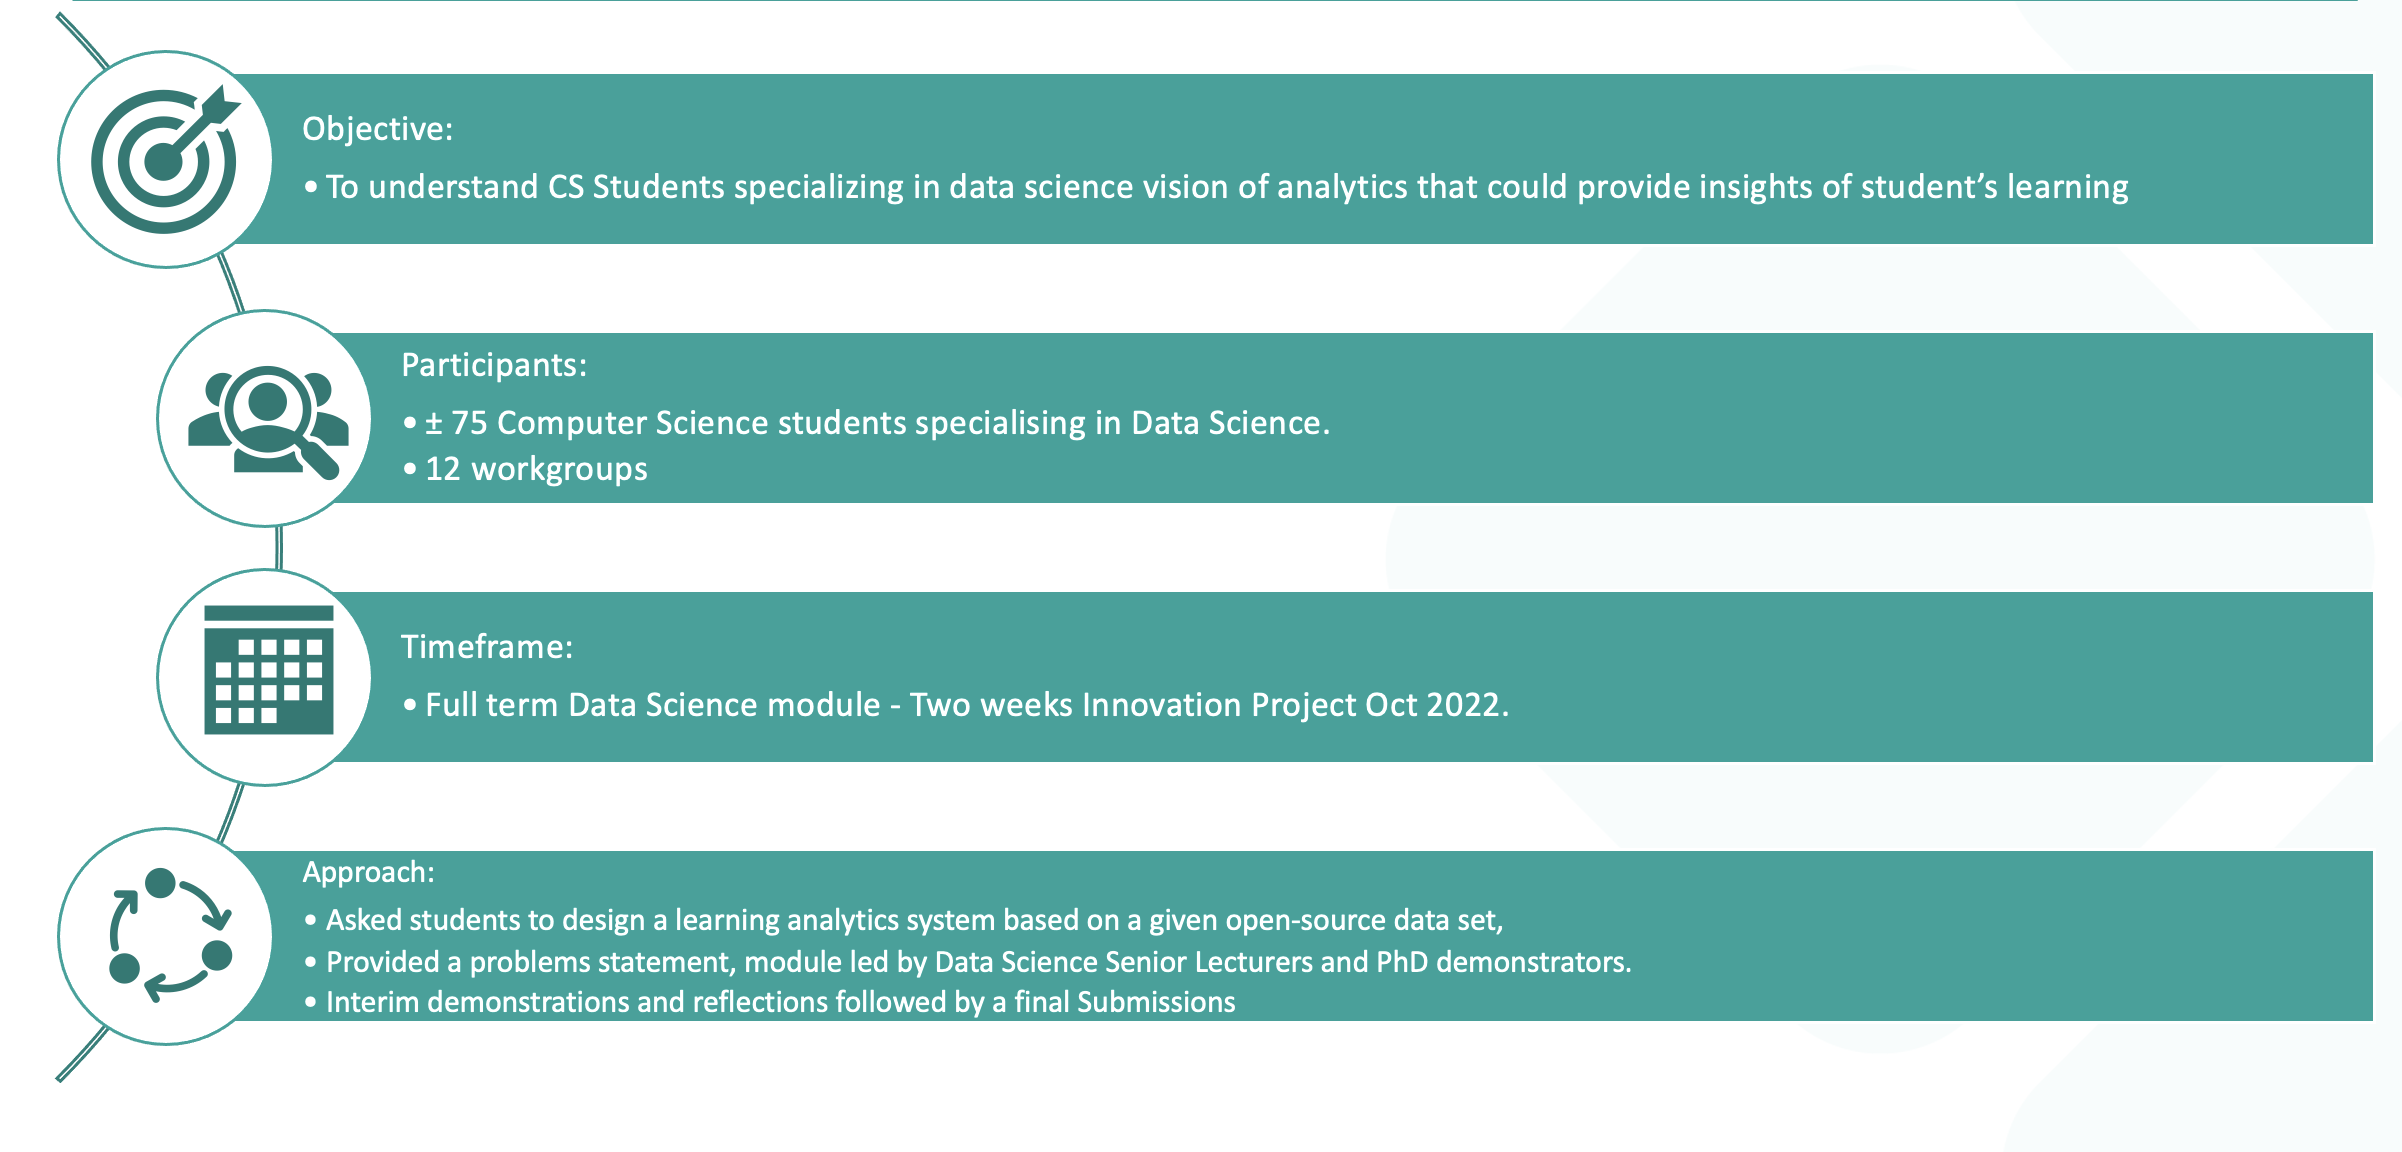 Image showing the 4 elements of the project. The first, with a target icon is for Objective - to understand CS students specialising in data science vision of analytics that could provide insights of student's learning. The second, with a magnifying glass icon if for Participants: +75 Computer Science students specialising in Data Science in 12 workgroups. The third is Timeframe - Full term Data Science module - Two weeks Innovation Project Oct 2022. The final, with 3 linked arrows is for Approach - Asked students to design a learning analytics system based on a given open-source data set. Provided a problems statement, module led by Data Science Senior Lecturers and PhD demonstrators. Interim demonstrations and reflections followed by a final submission.